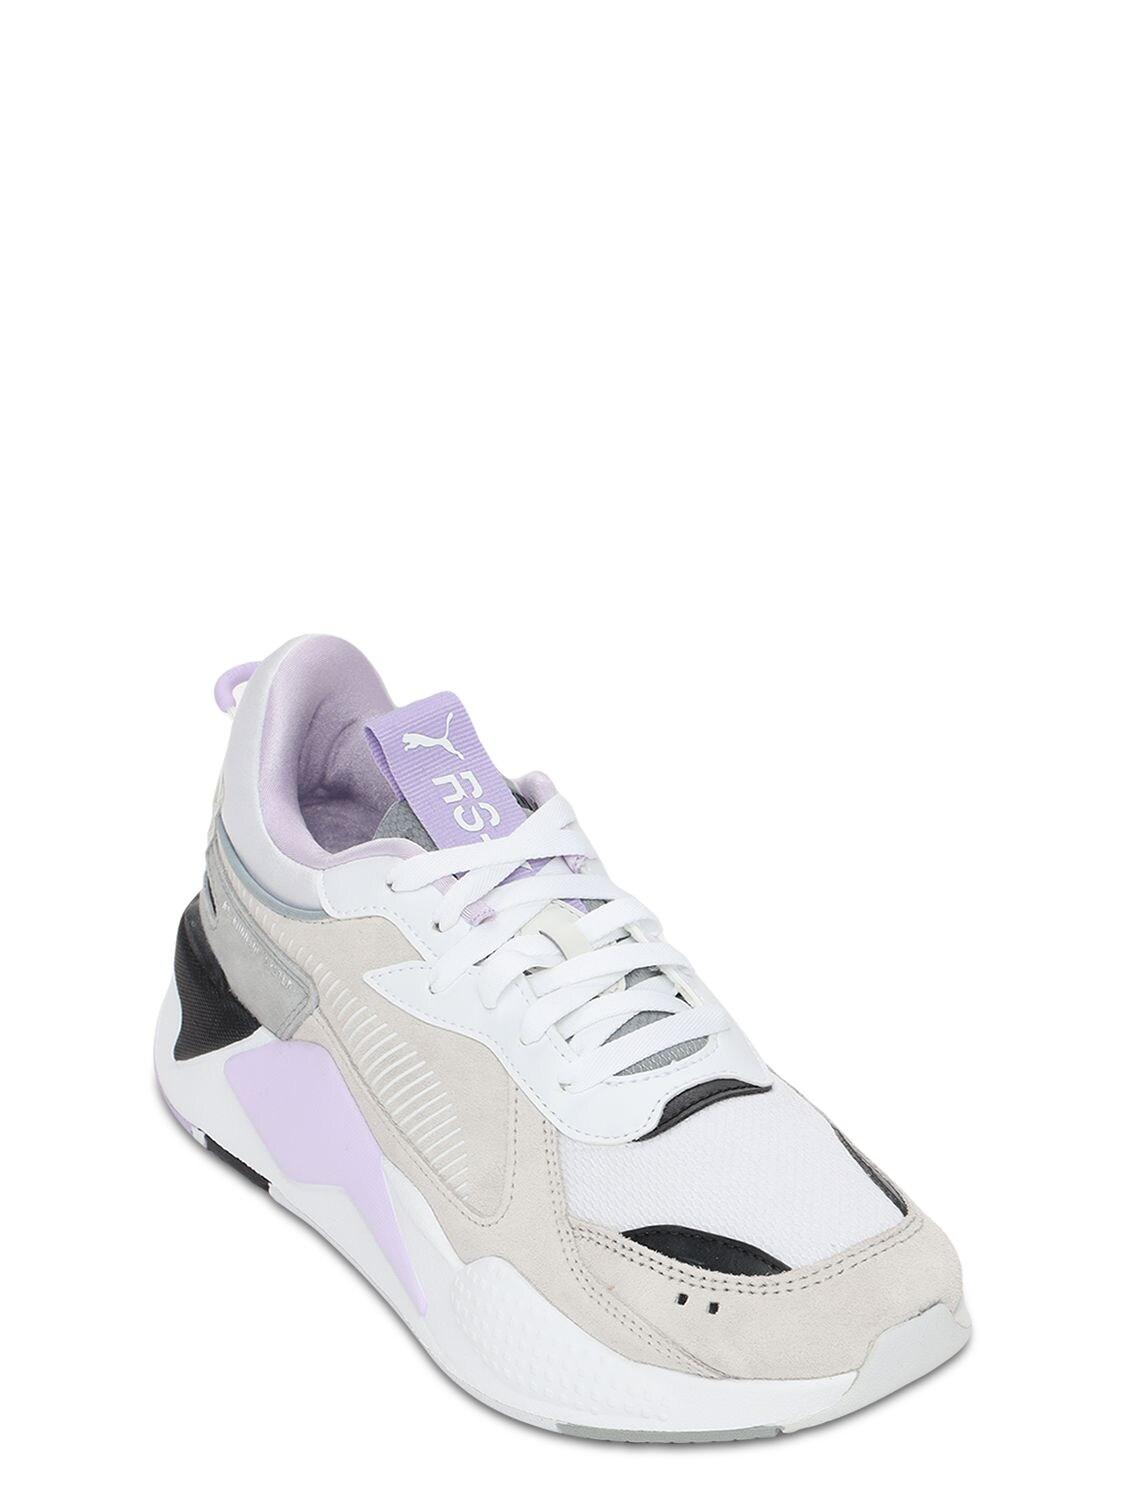 PUMA Rs-x Reinvent Sneakers in White/Lilac (White) | Lyst